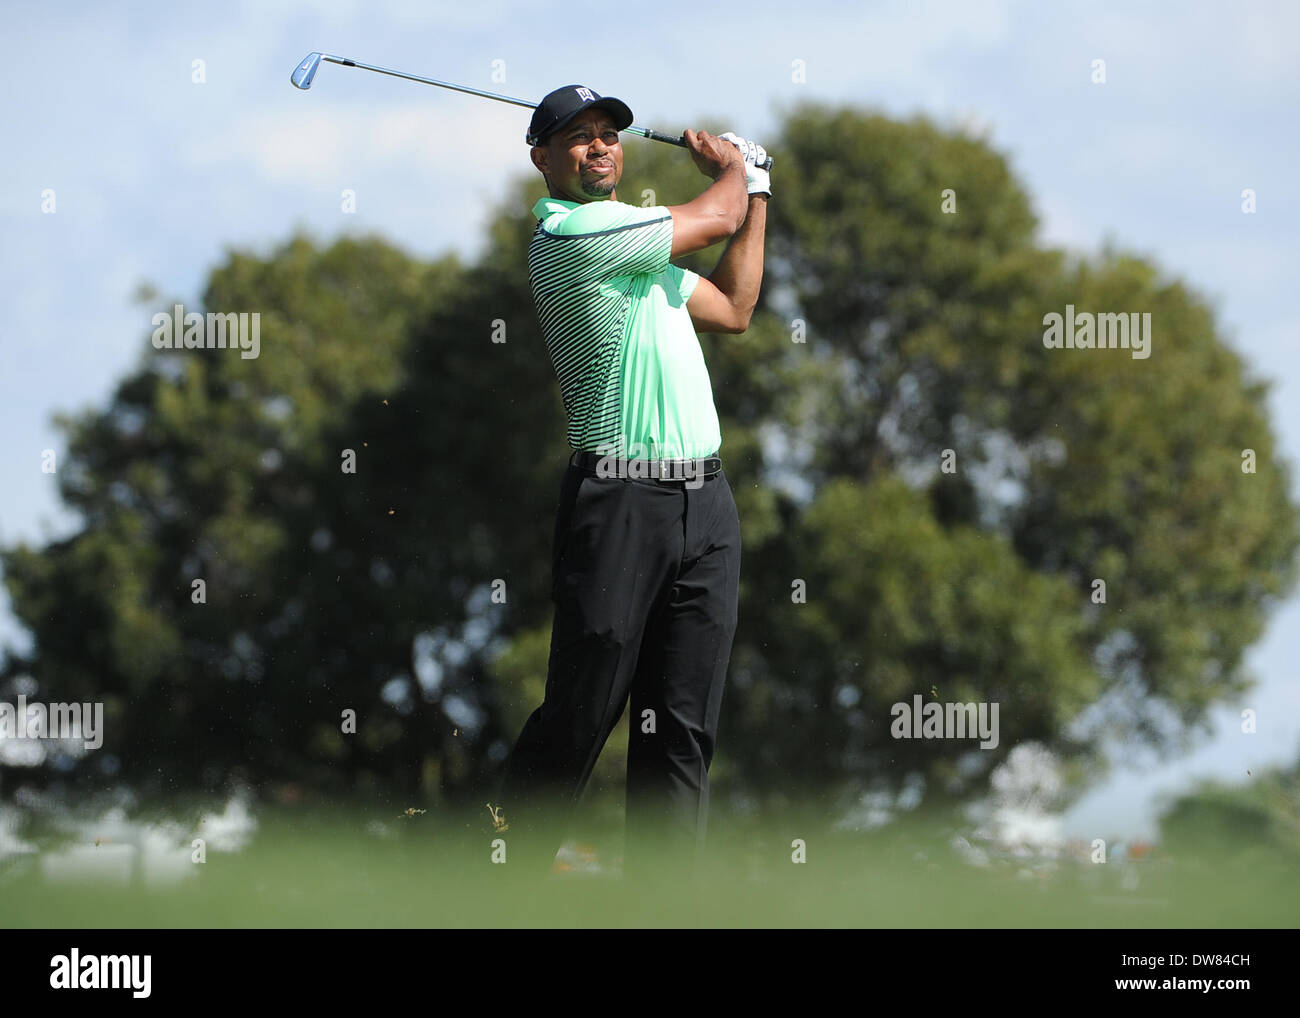 Florida, USA. 28th Feb, 2014. Tiger Woods during the Second Round of The Honda Classic at the PGA national Champion Course, Palm Beach Gardens, FL © Action Plus Sports/Alamy Live News Stock Photo